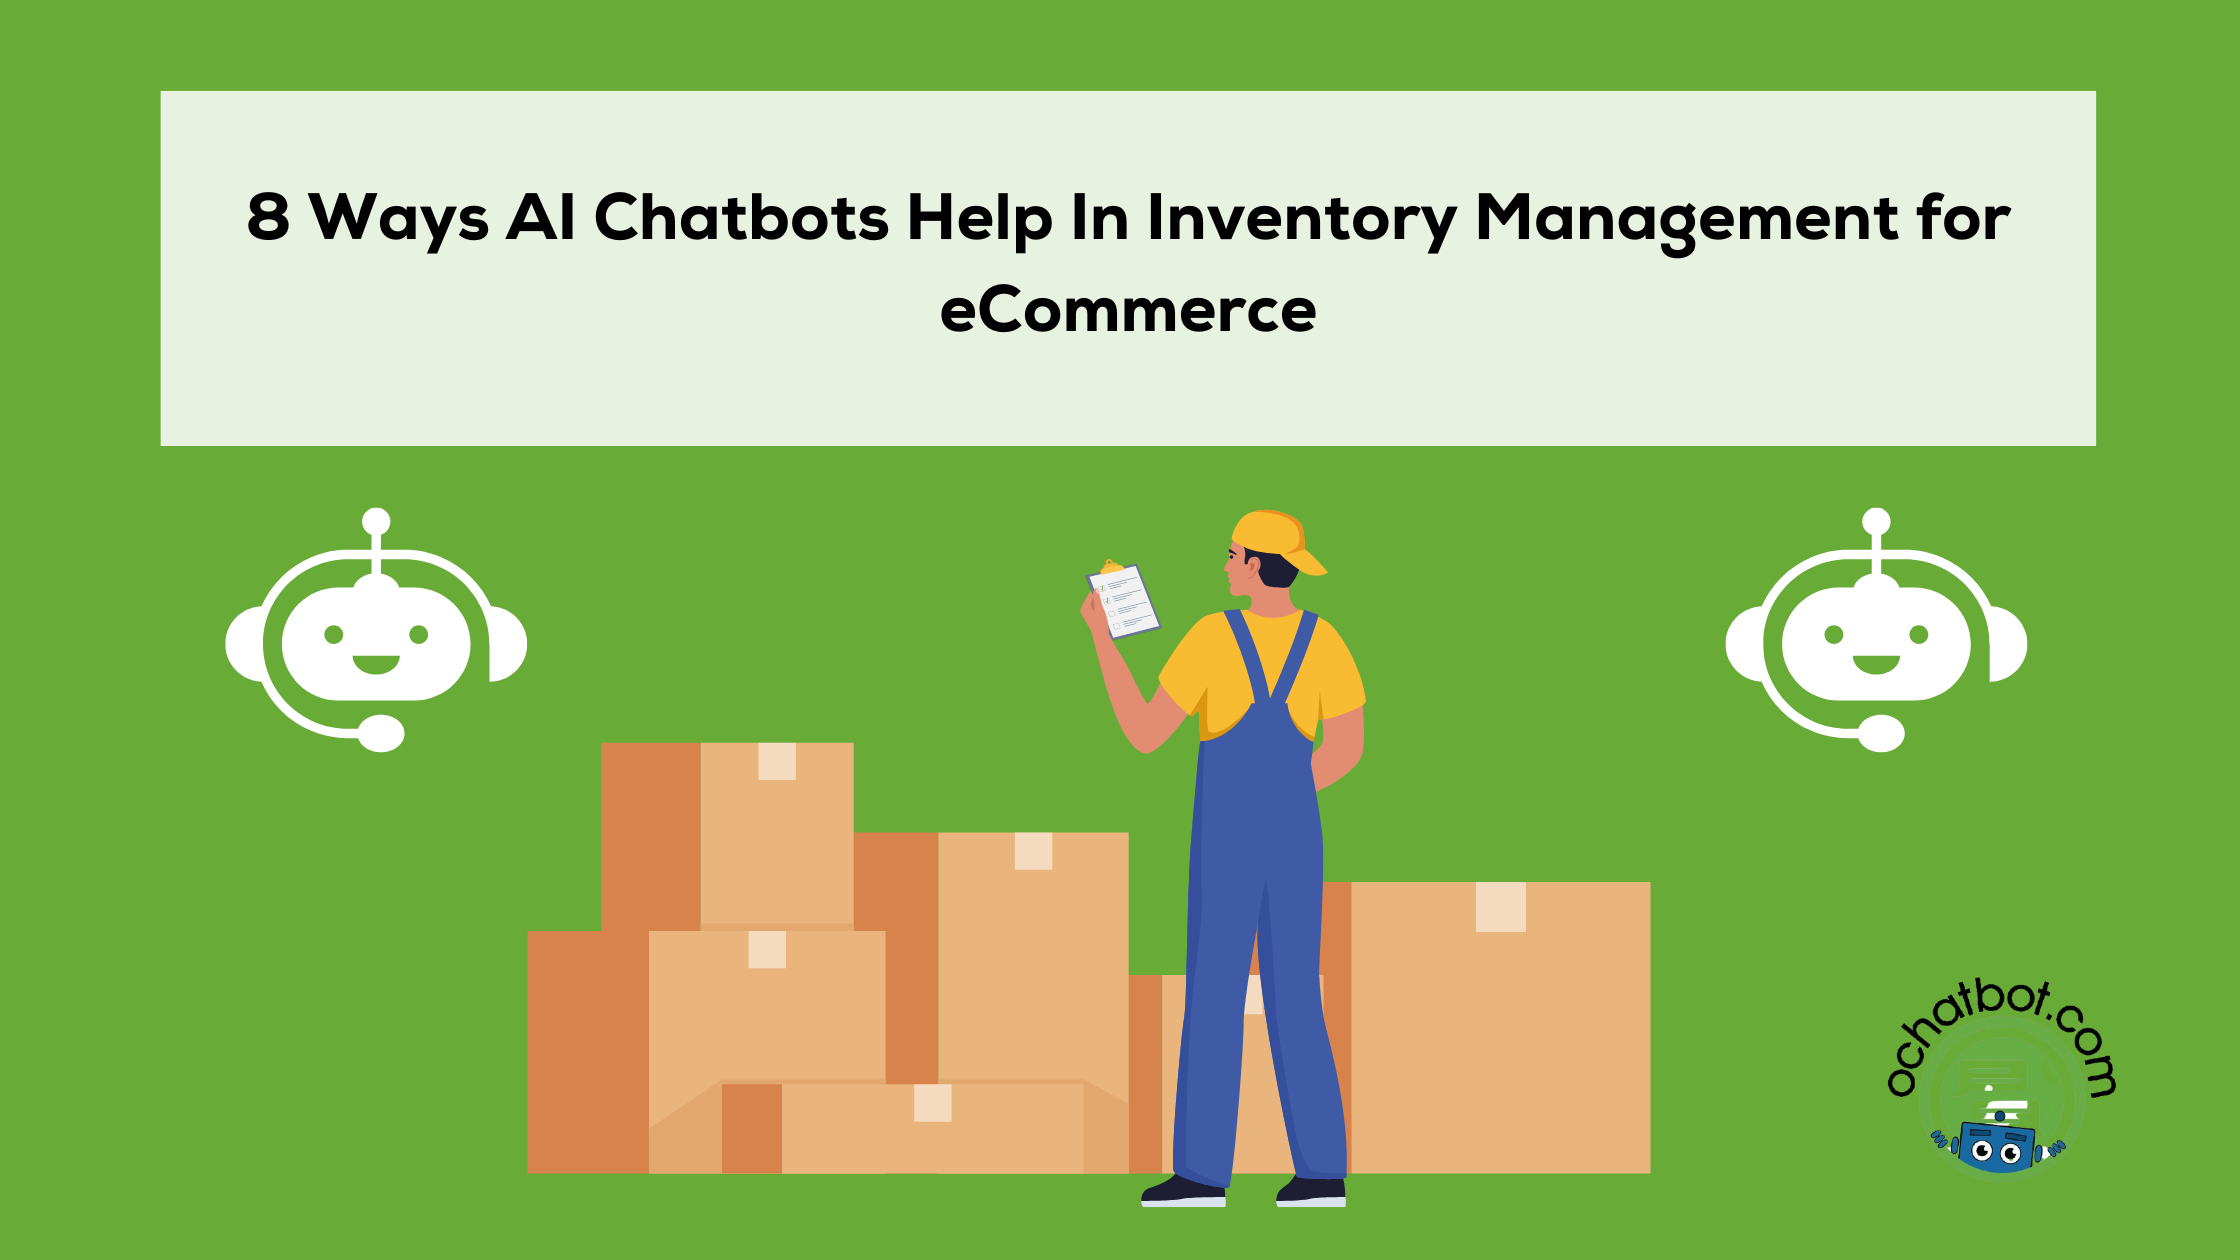 8 Ways AI Chatbots Help In Inventory Management for eCommerce